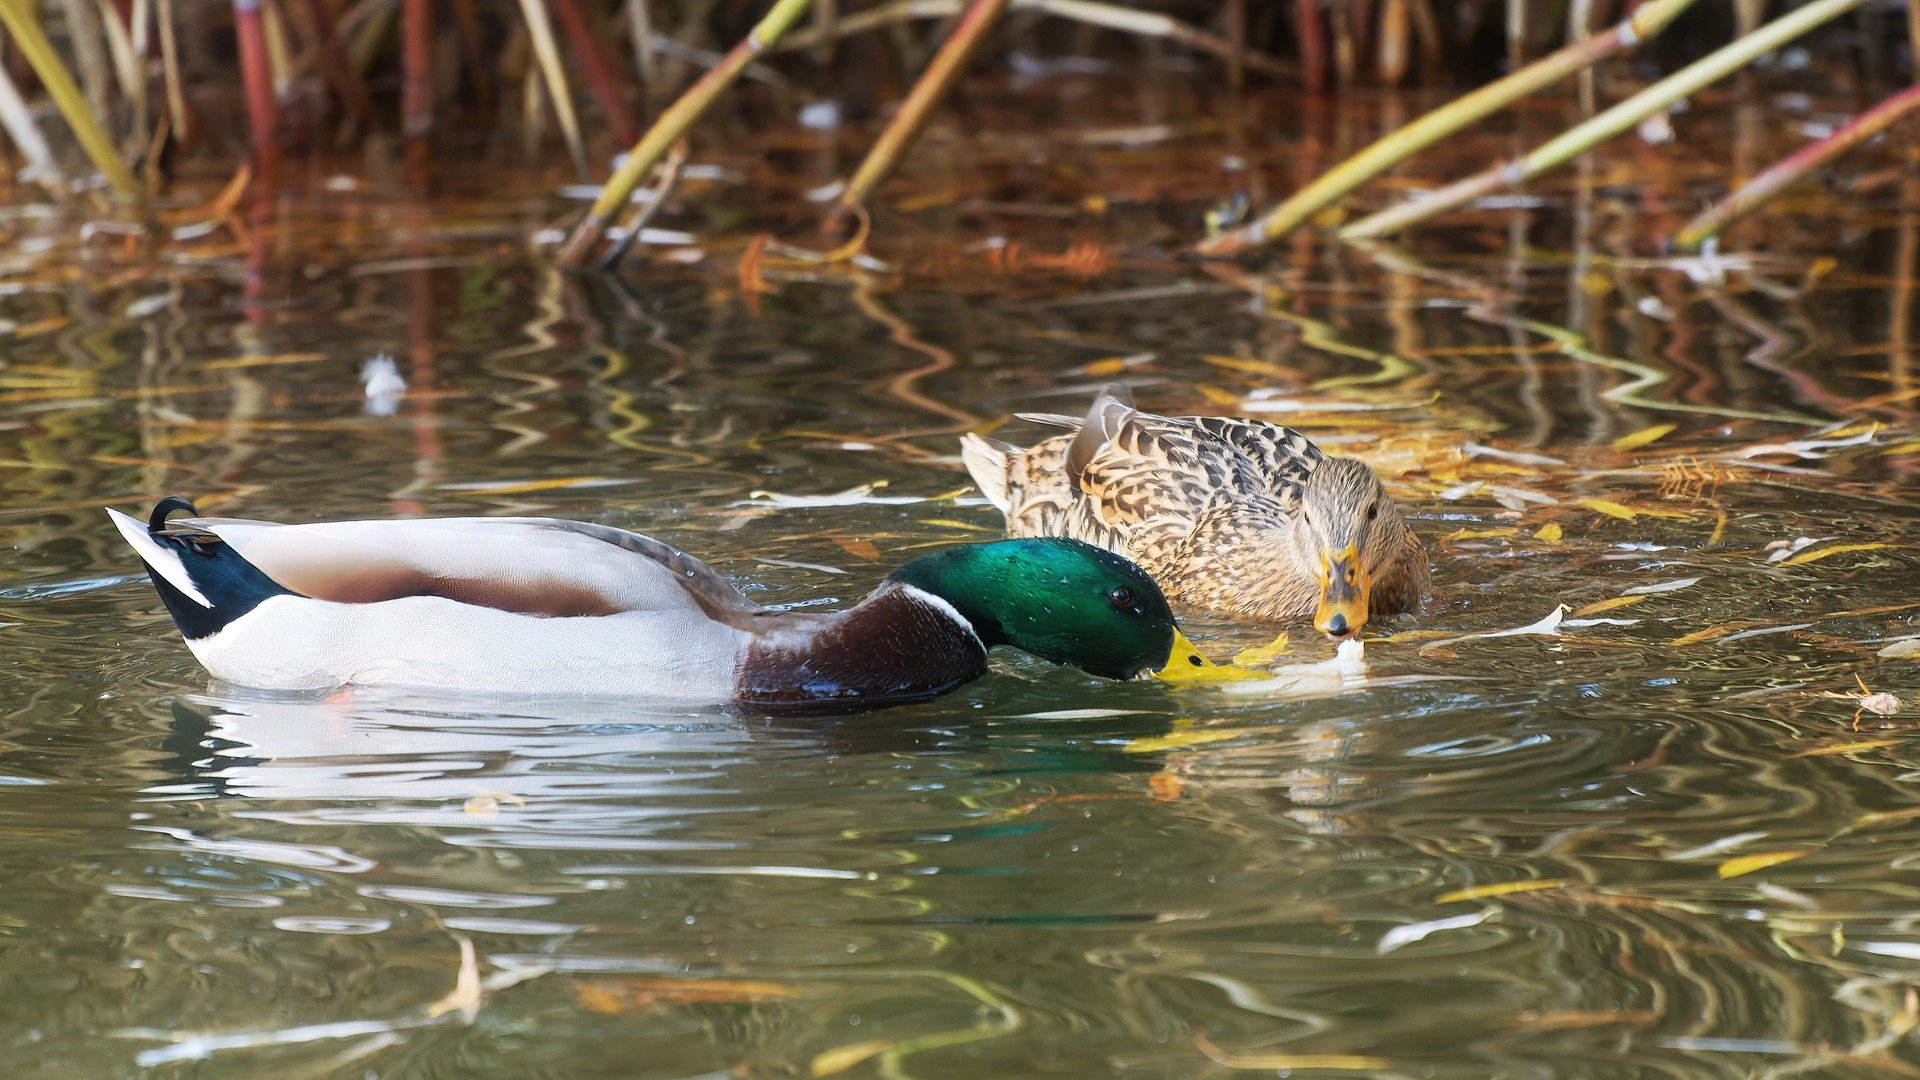 A male and female duck floating in water and eating.